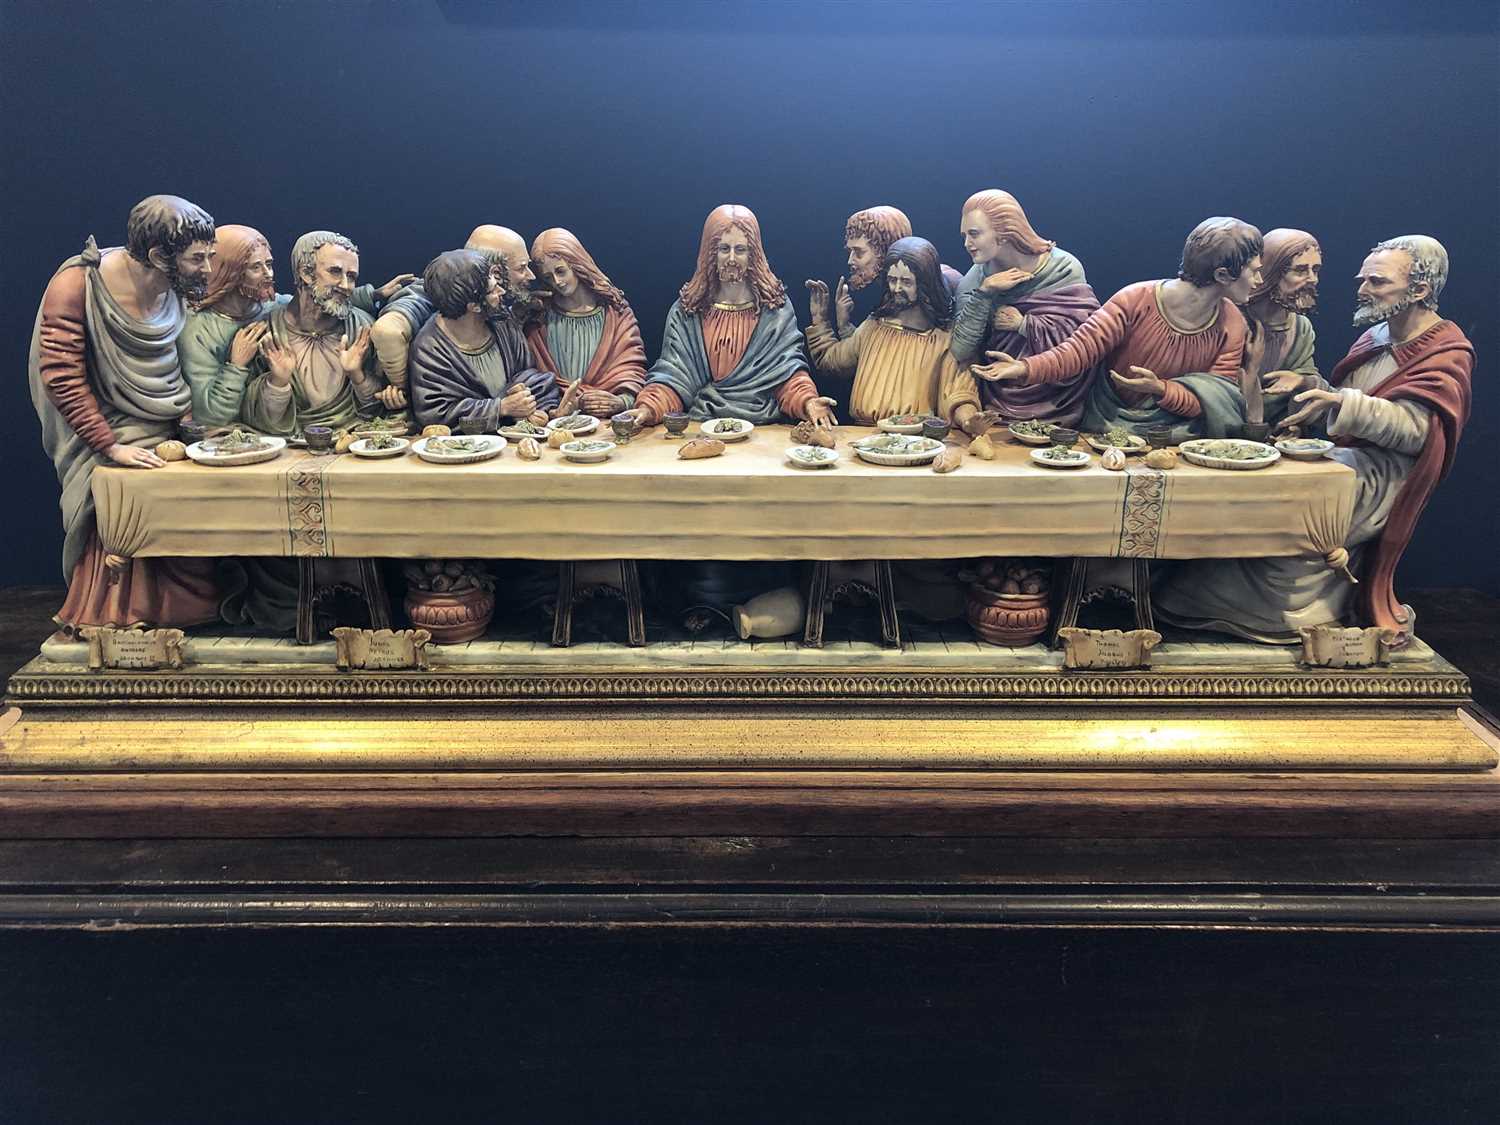 Lot 1233 - A LARGE CAPO DI MONTE GROUP OF 'THE LAST SUPPER'